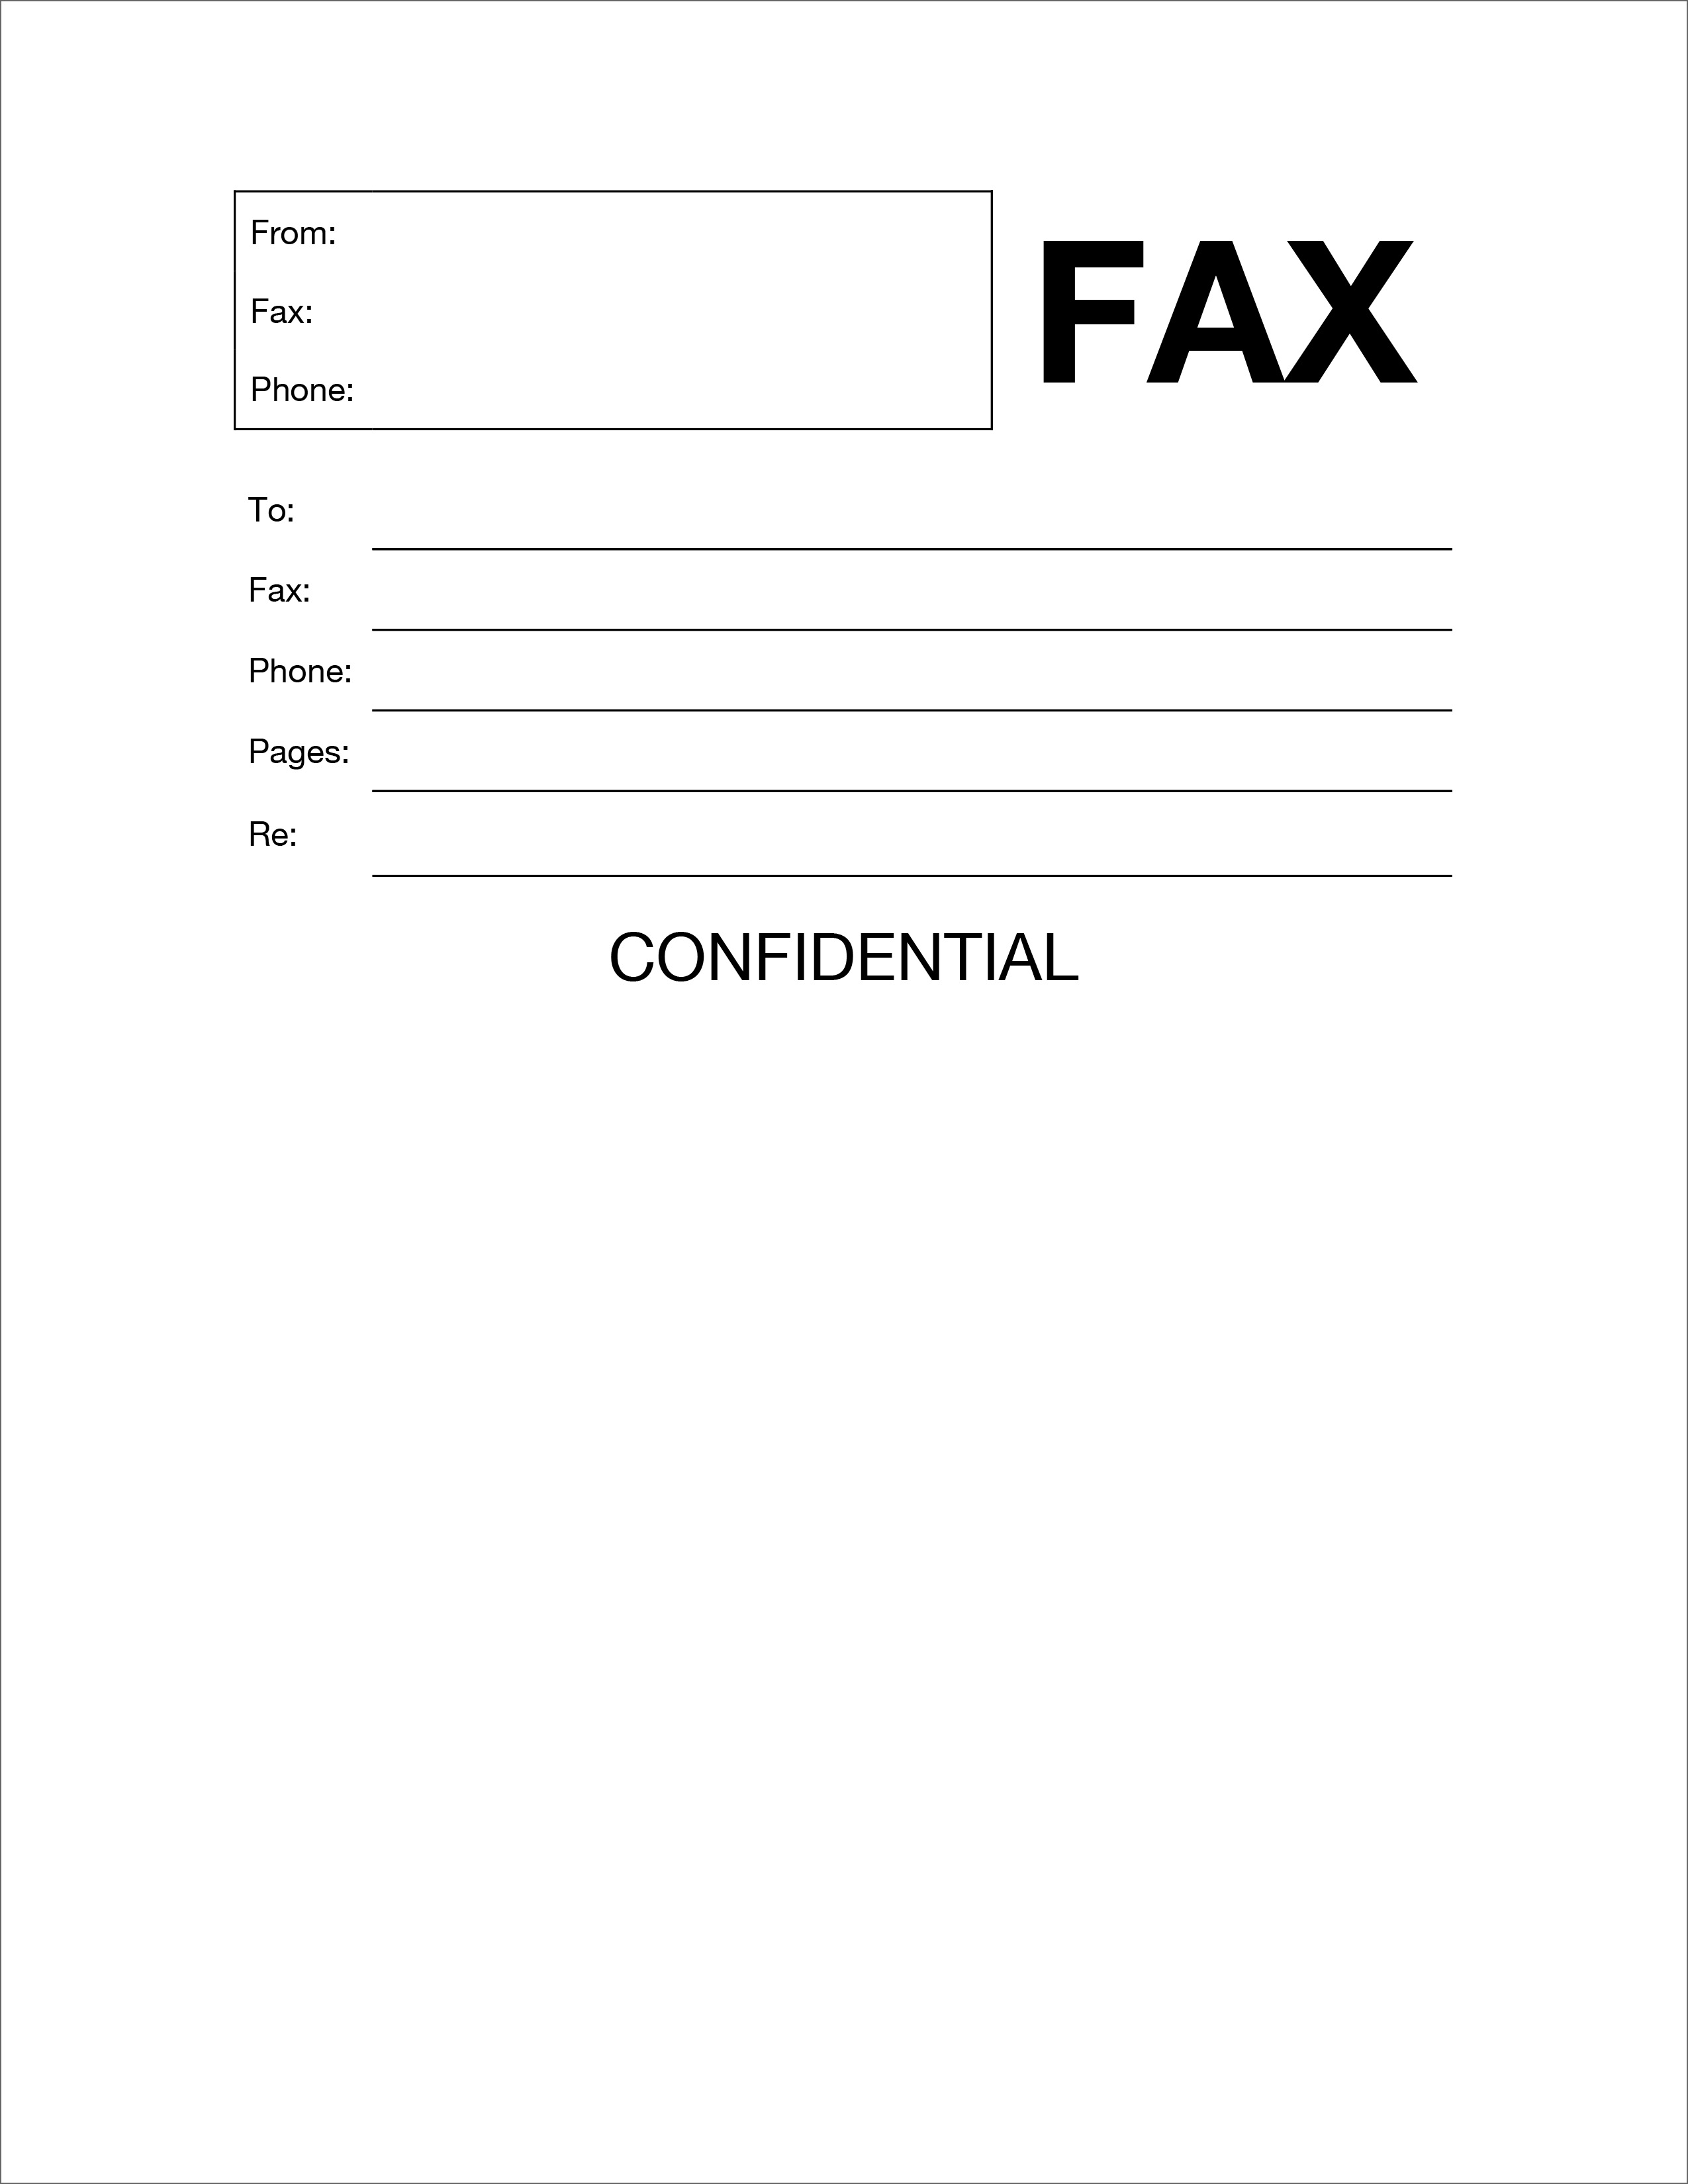 fax cover letter template word download